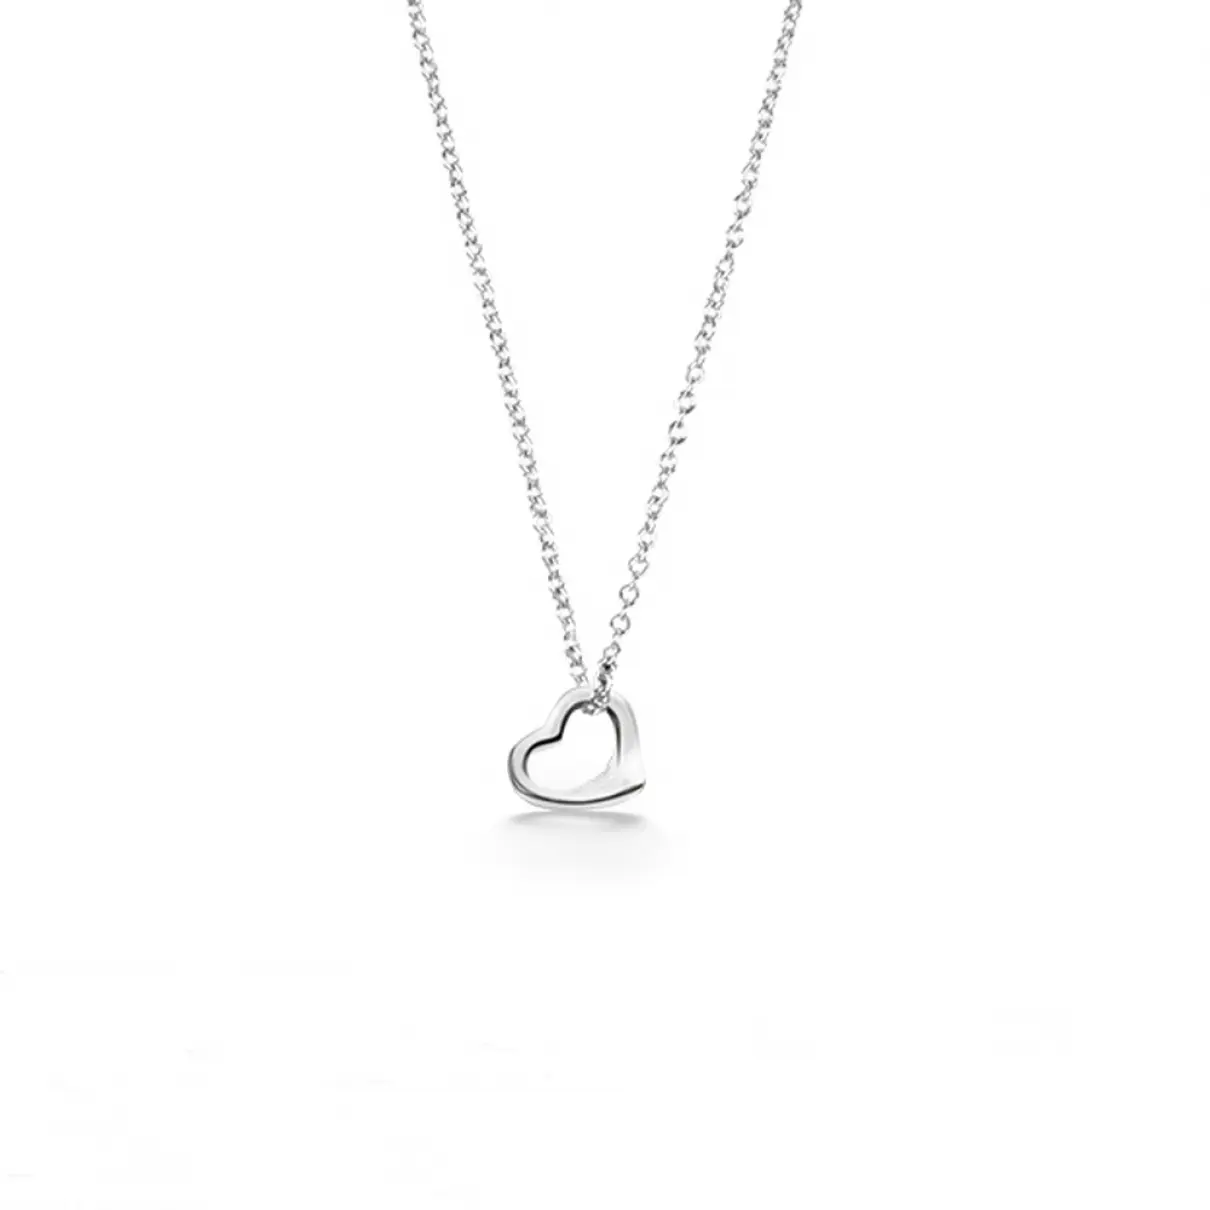 Buy Tiffany & Co Necklace online